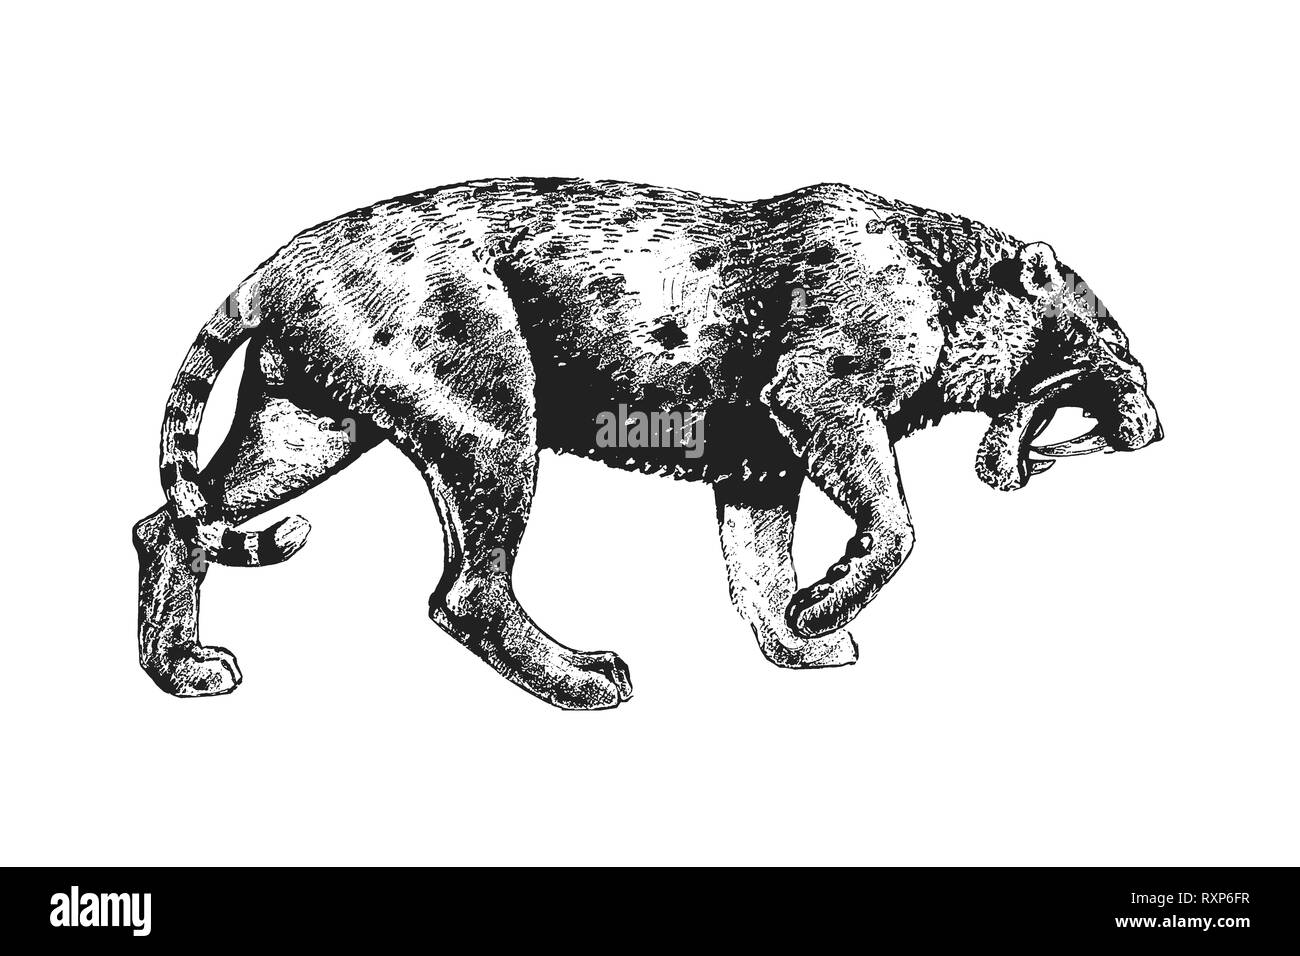 Saber tooth cat drawing. Animals illustration. Saber-toothed cat attack. Stock Photo